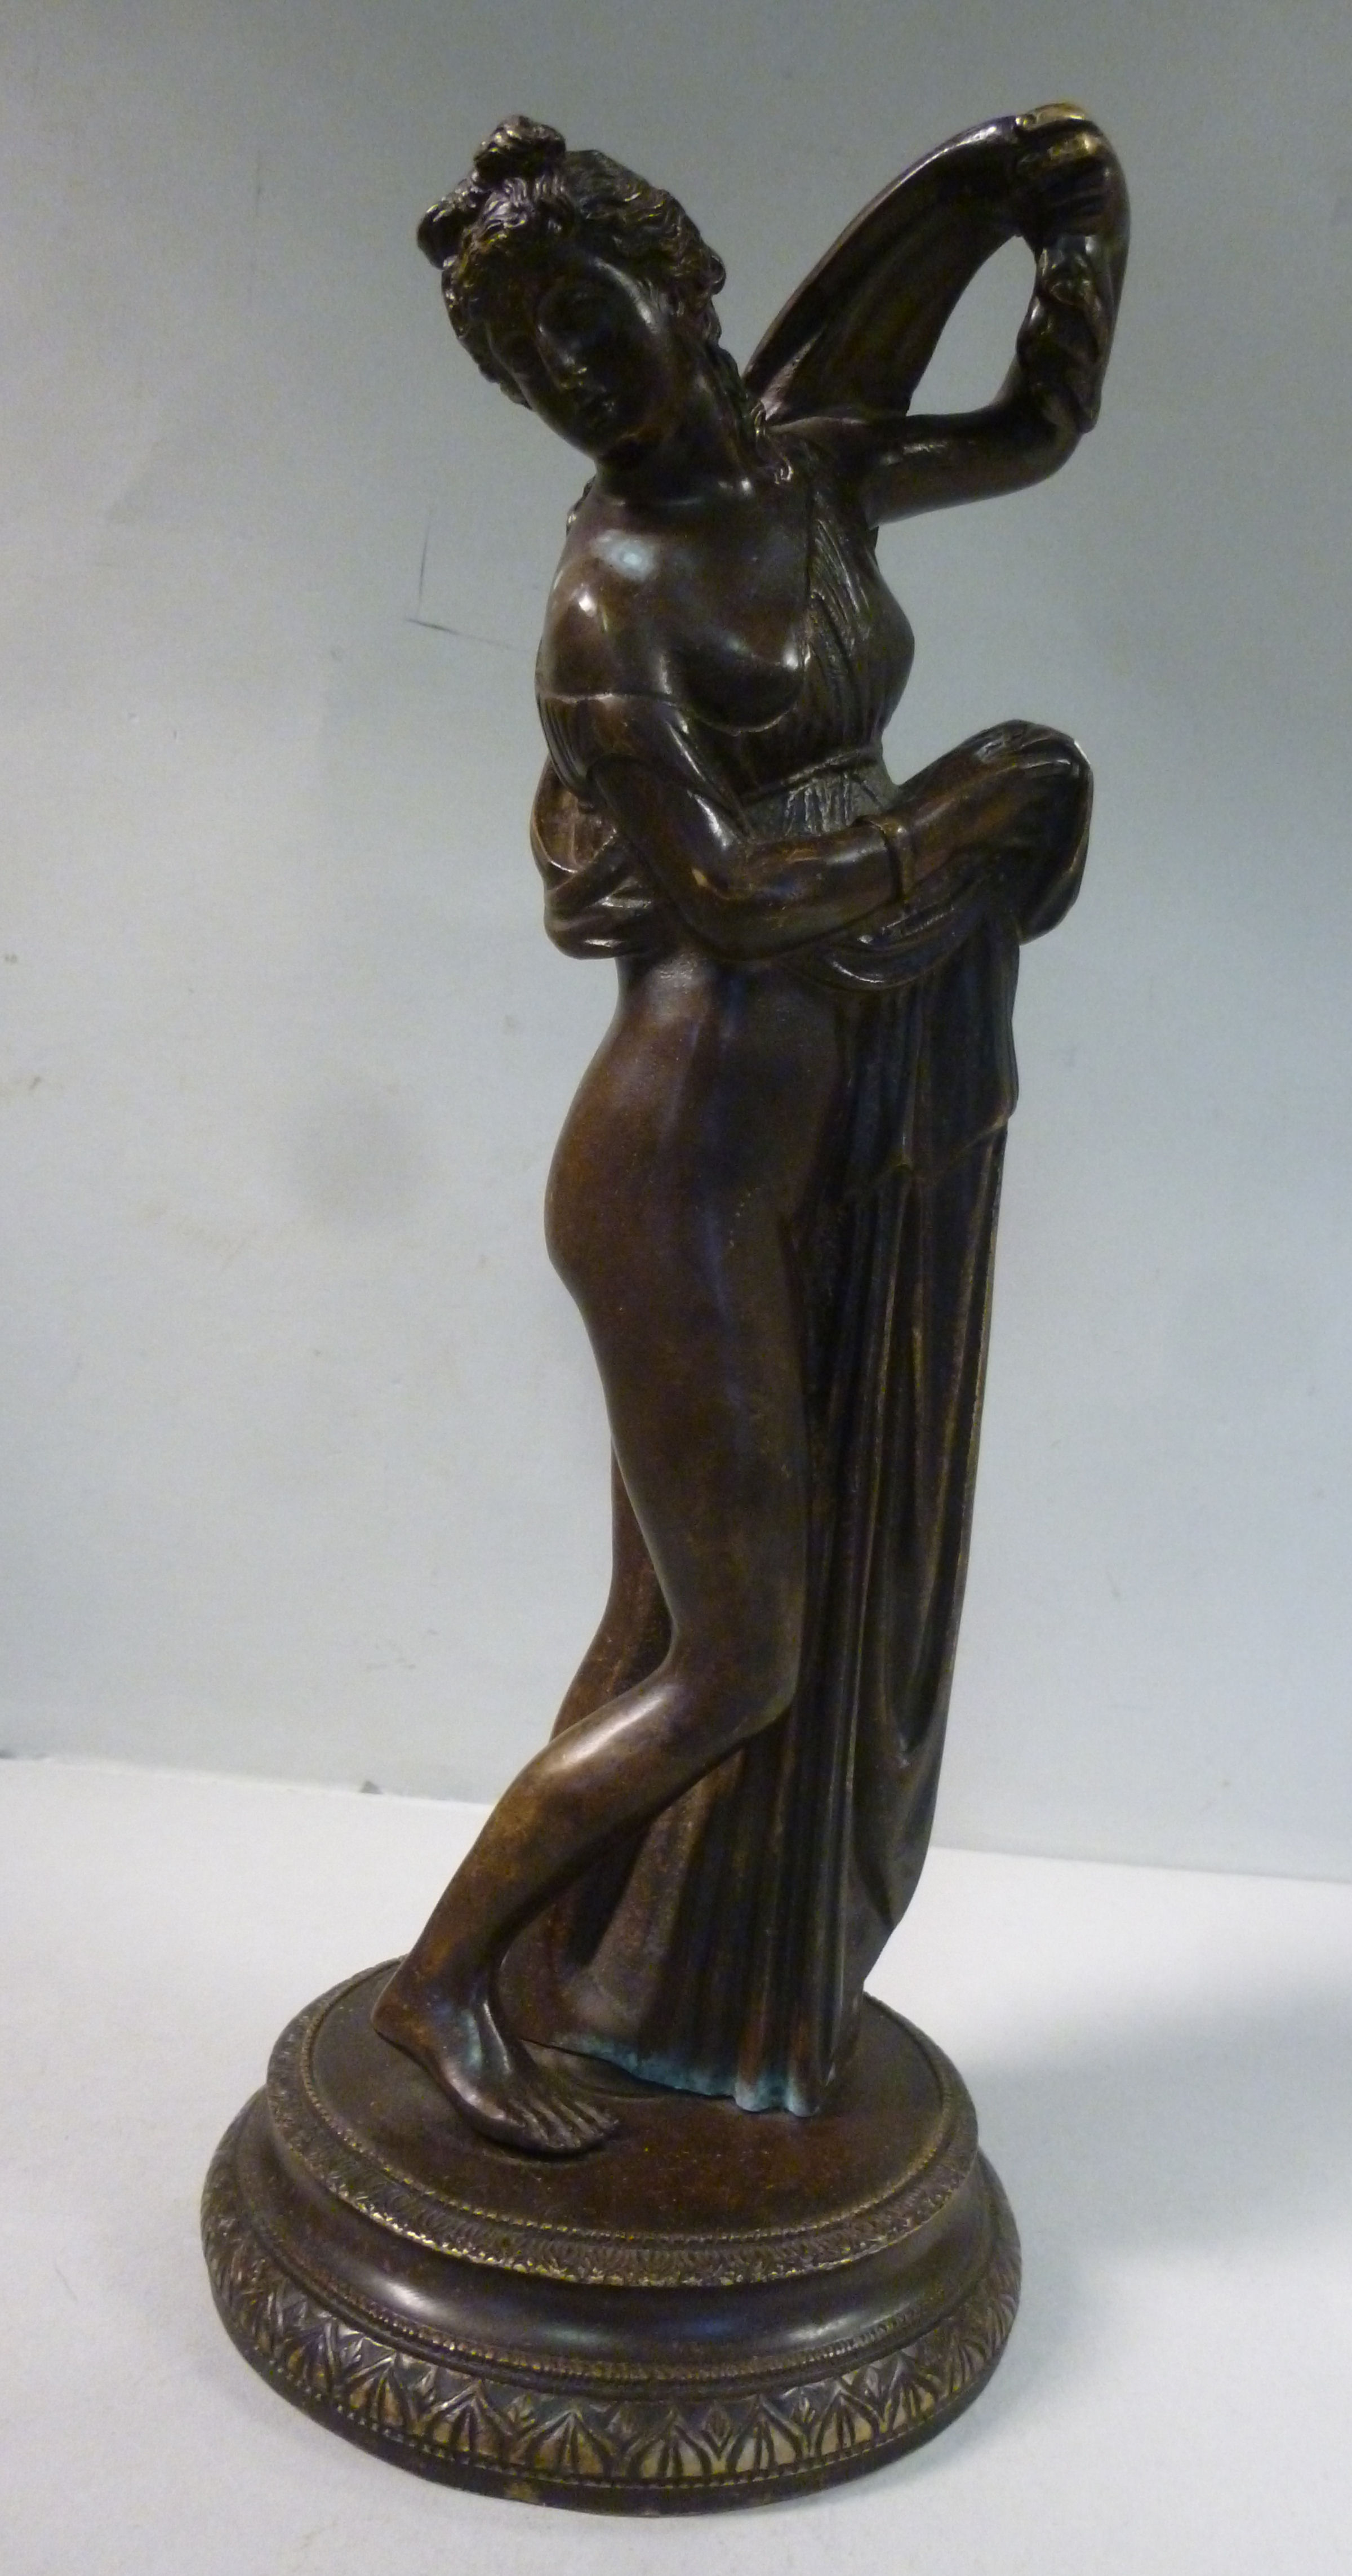 An early 20thC cast and patinated bronze figure, a partially robed, standing classical maiden,